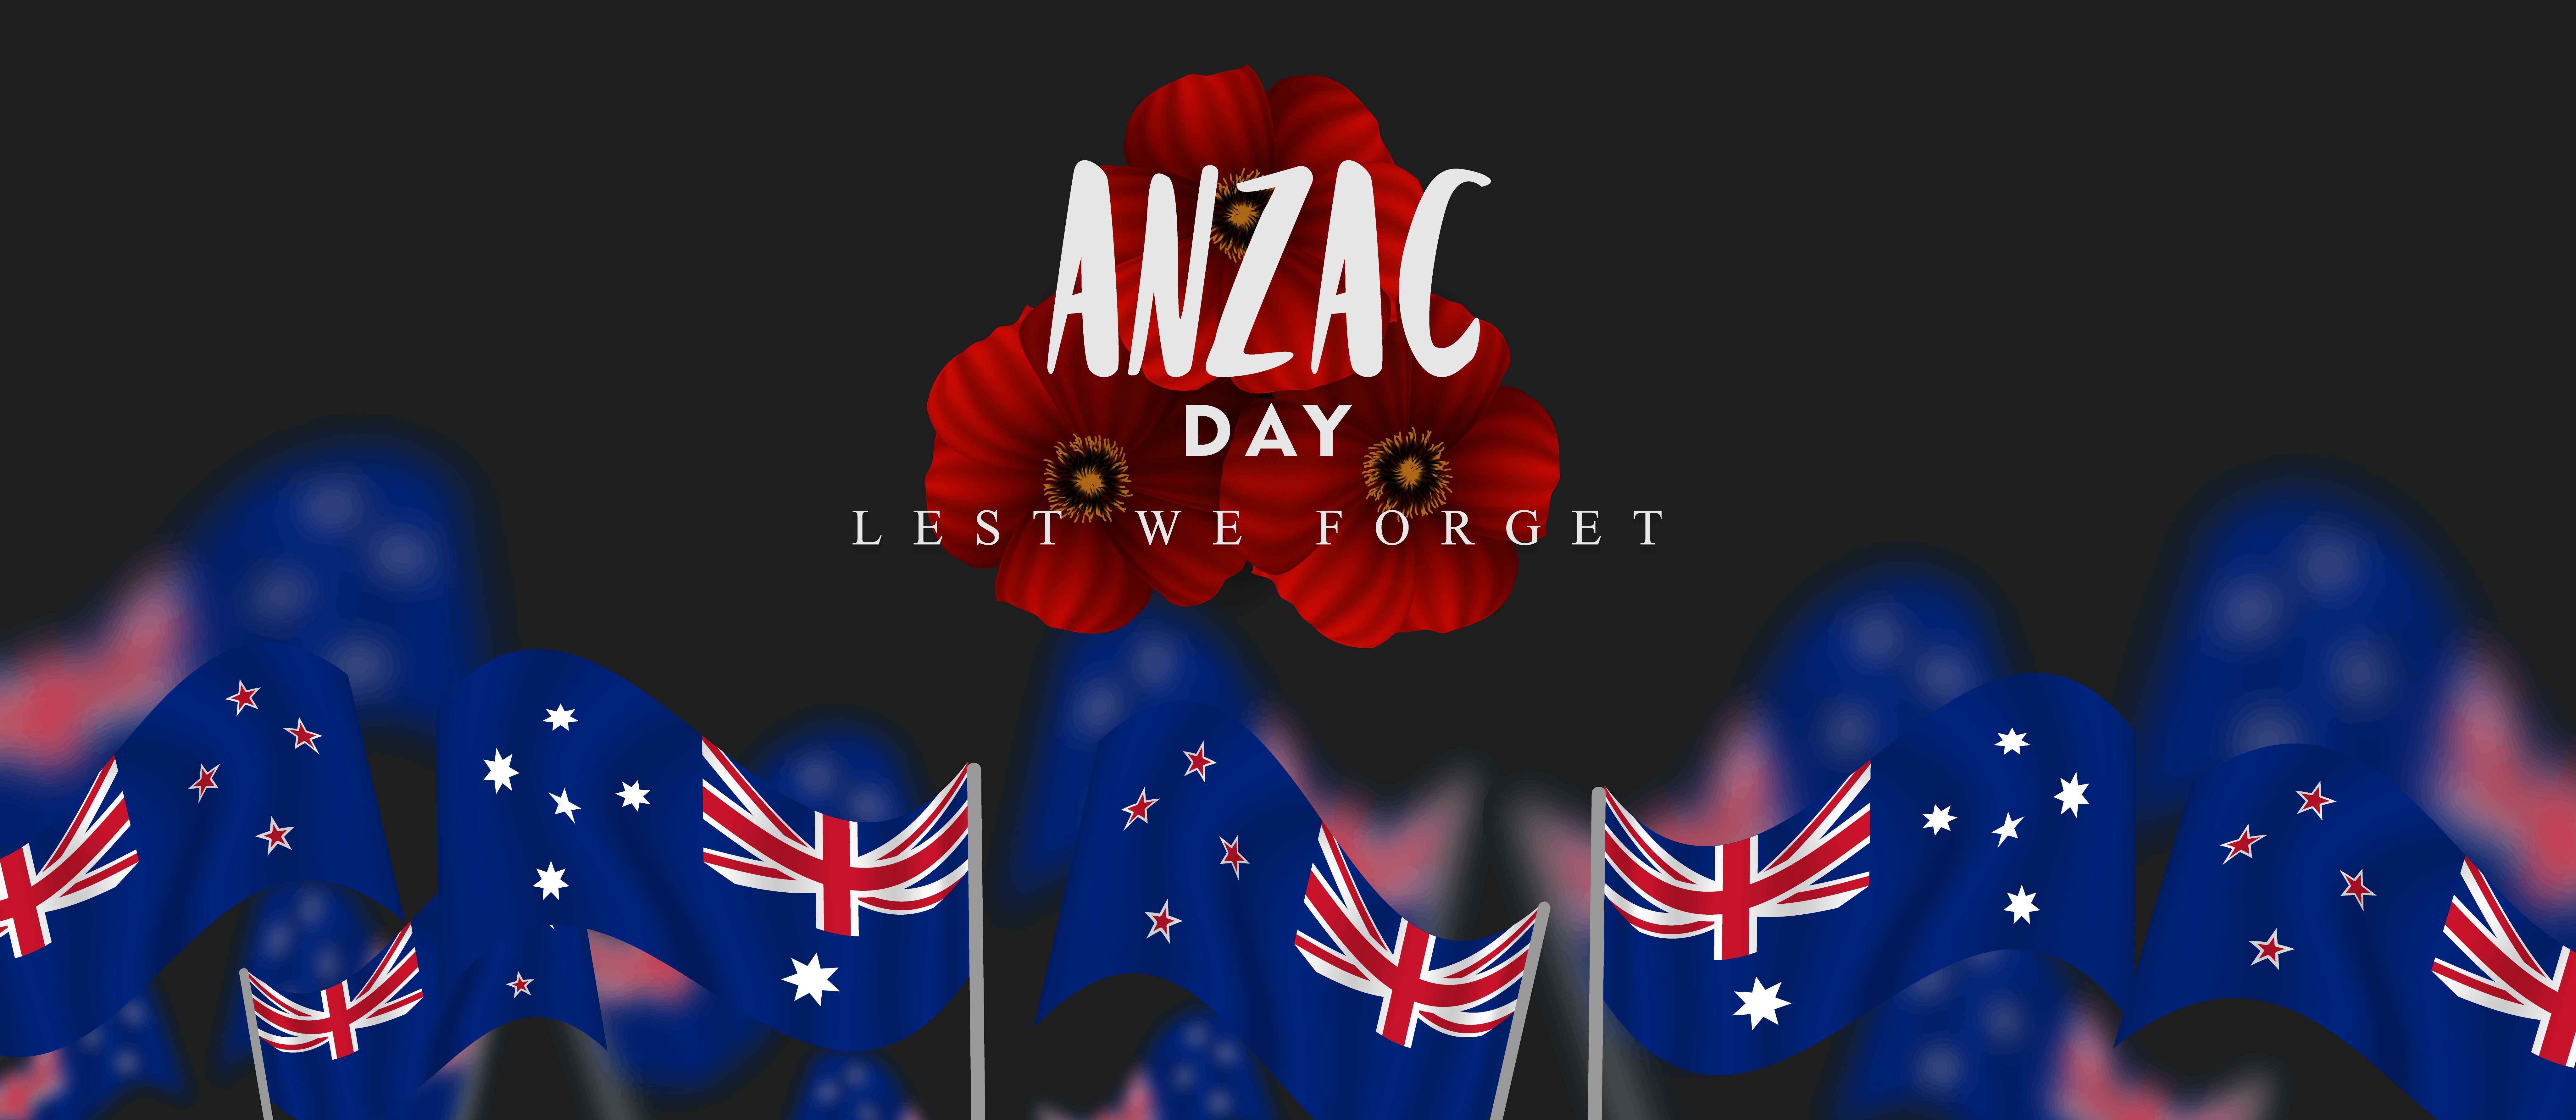 ANZAC Day a national day of remembrance in Australia and New Zealand